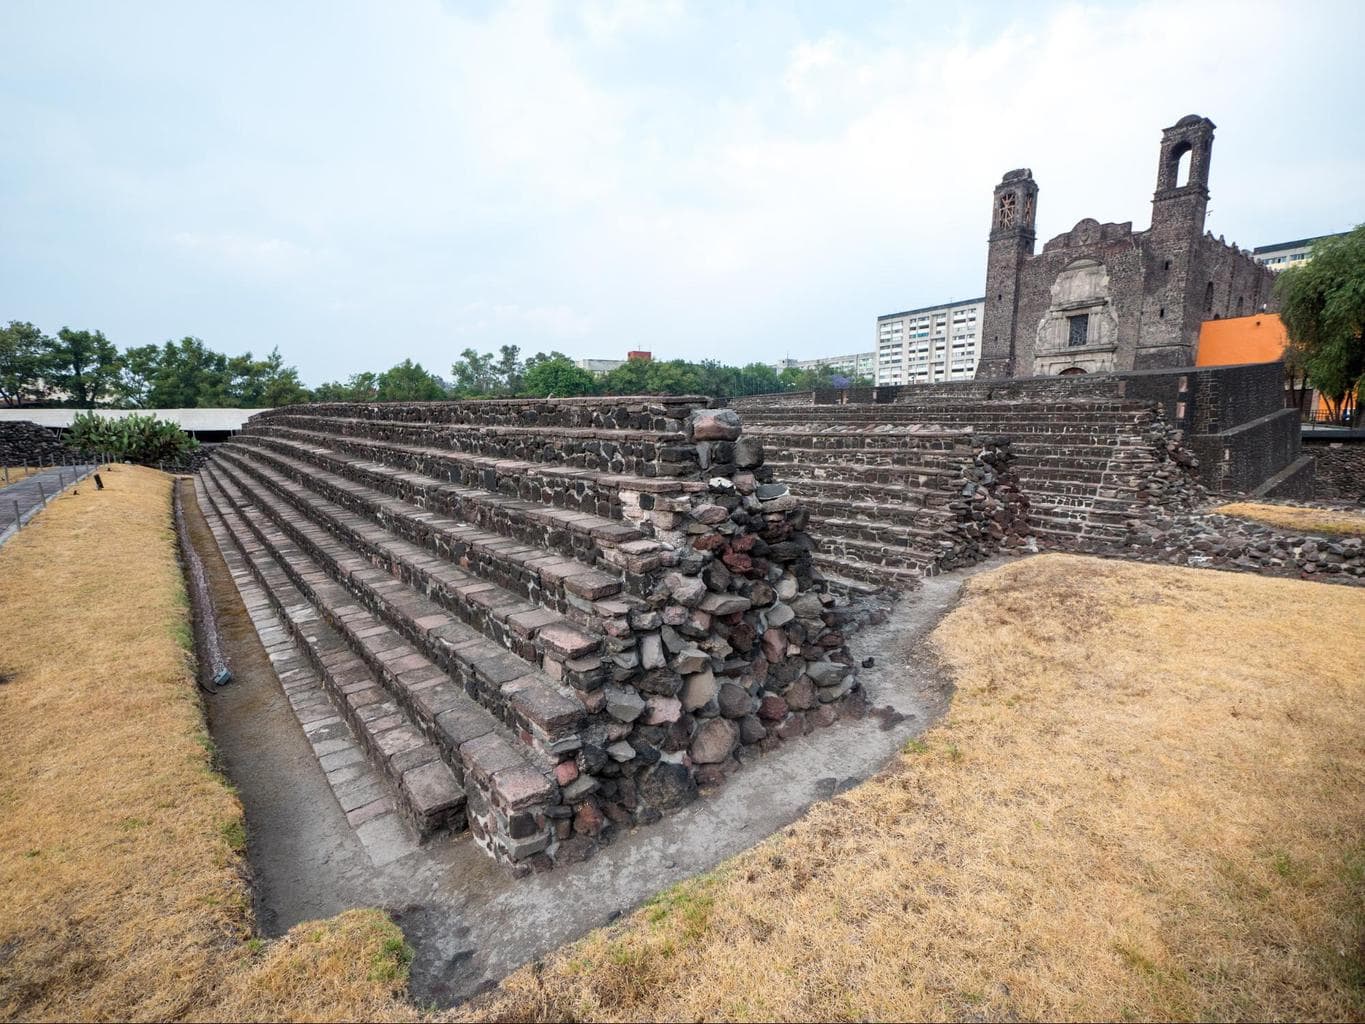 Tlatelolco archeological site